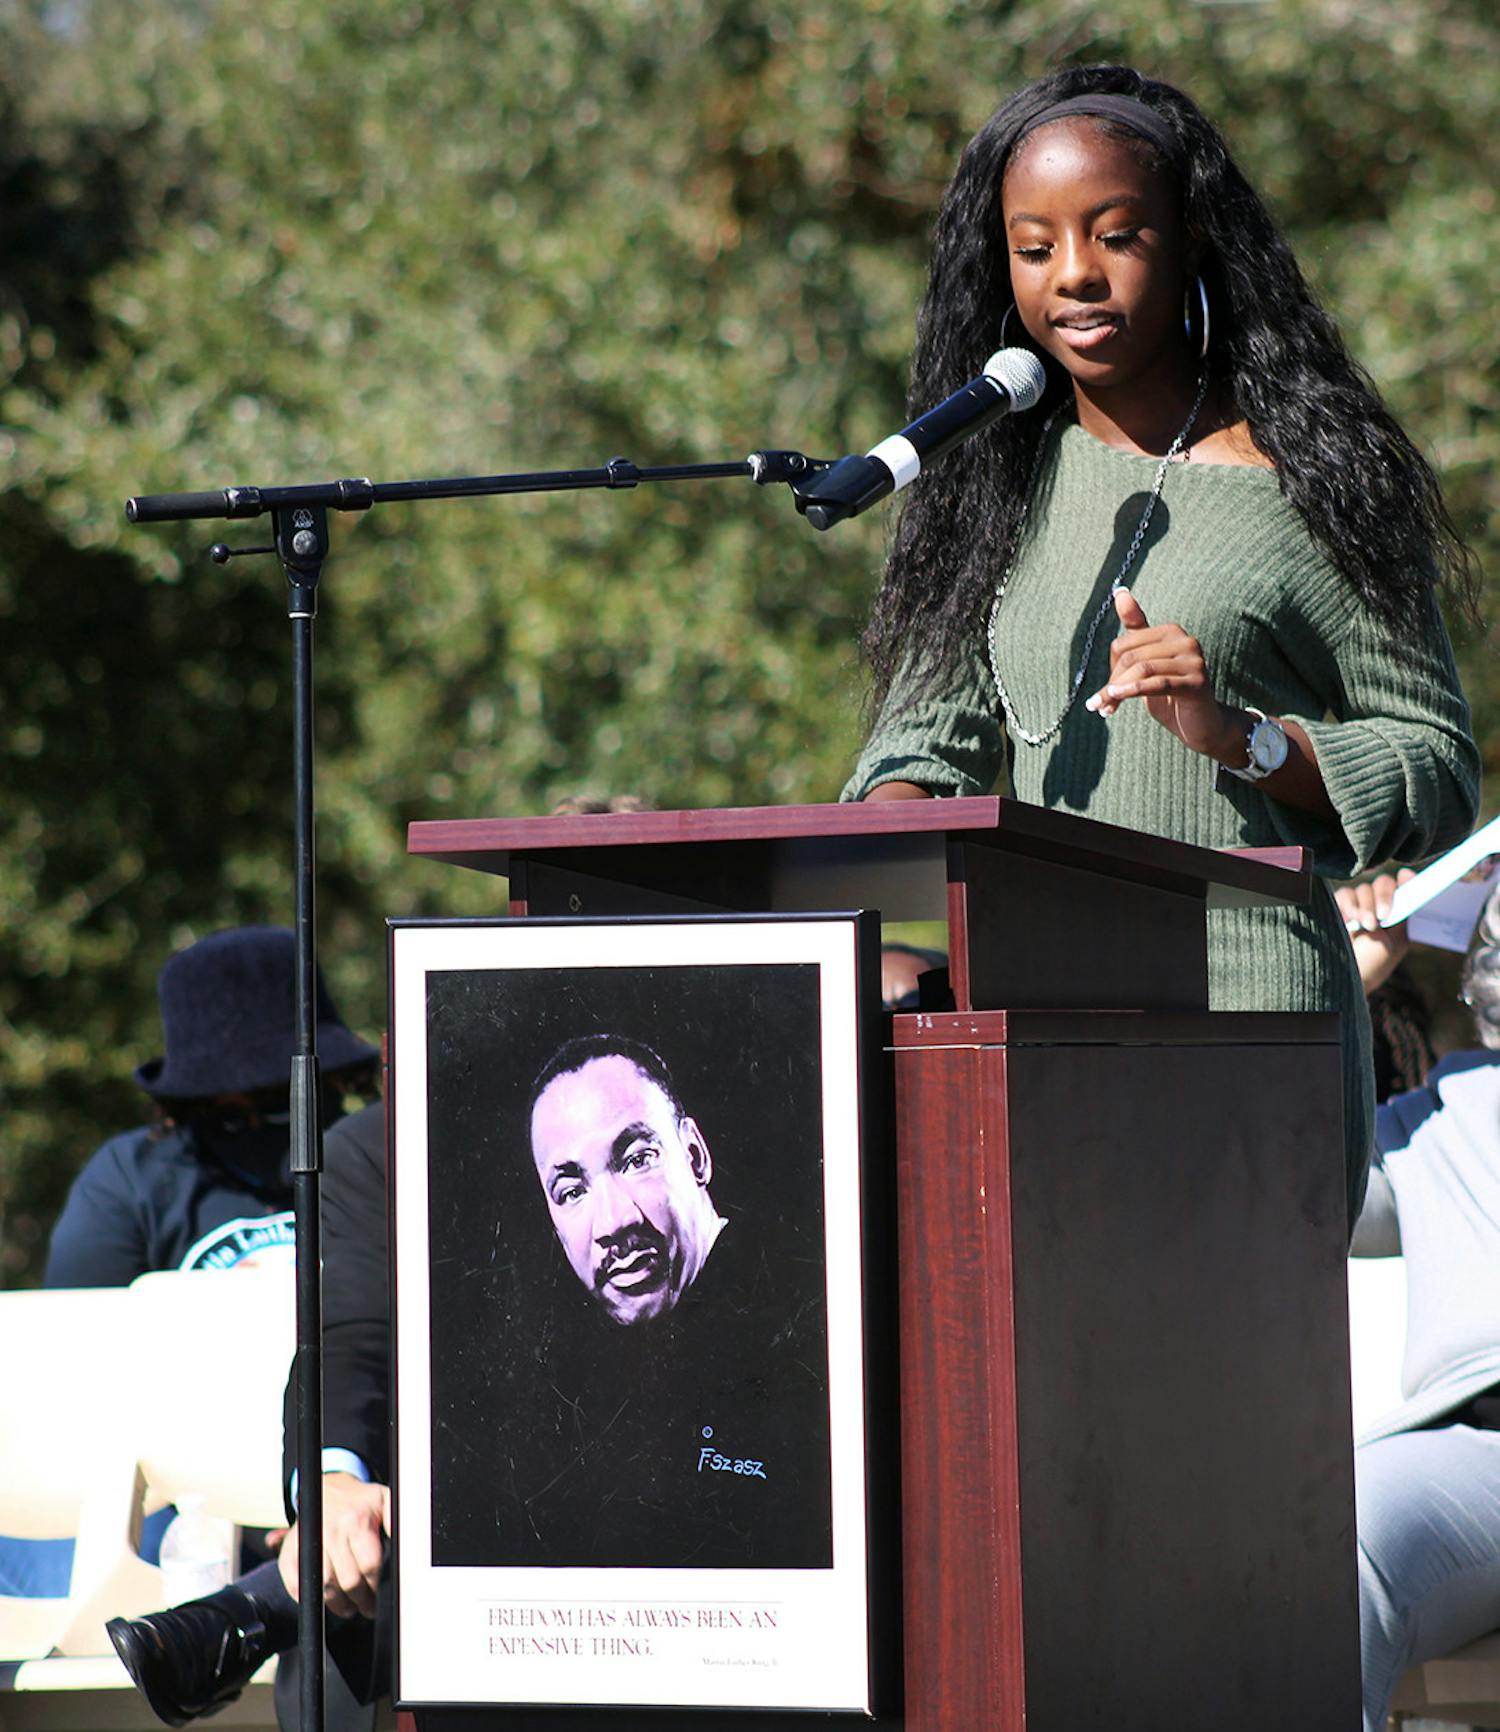 Taylor Hill-Miles, this year’s winner of the Edna M. Hart Keeper of the Dream Award, gives a keynote speech at Citizens Field on Martin Luther King Jr. Day. She talked about the importance of demanding justice for the Black community.